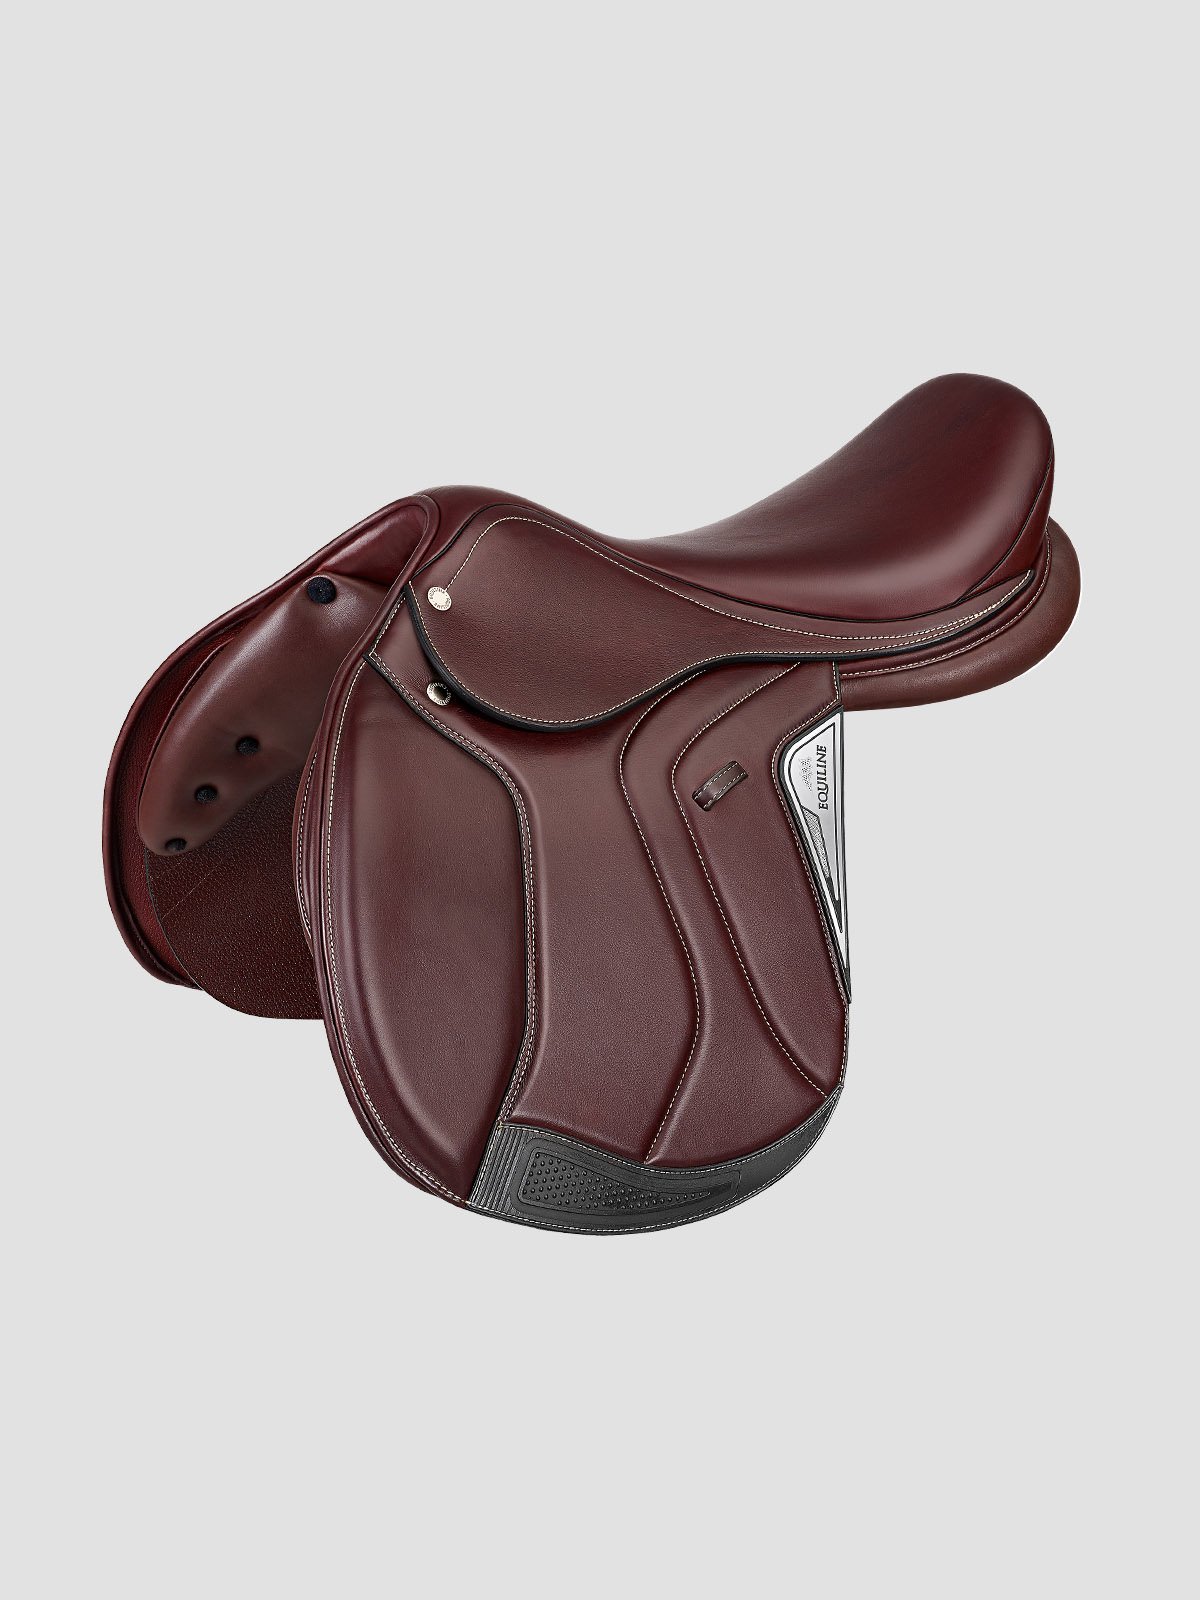 American Equiline Jumper saddle in brown leather